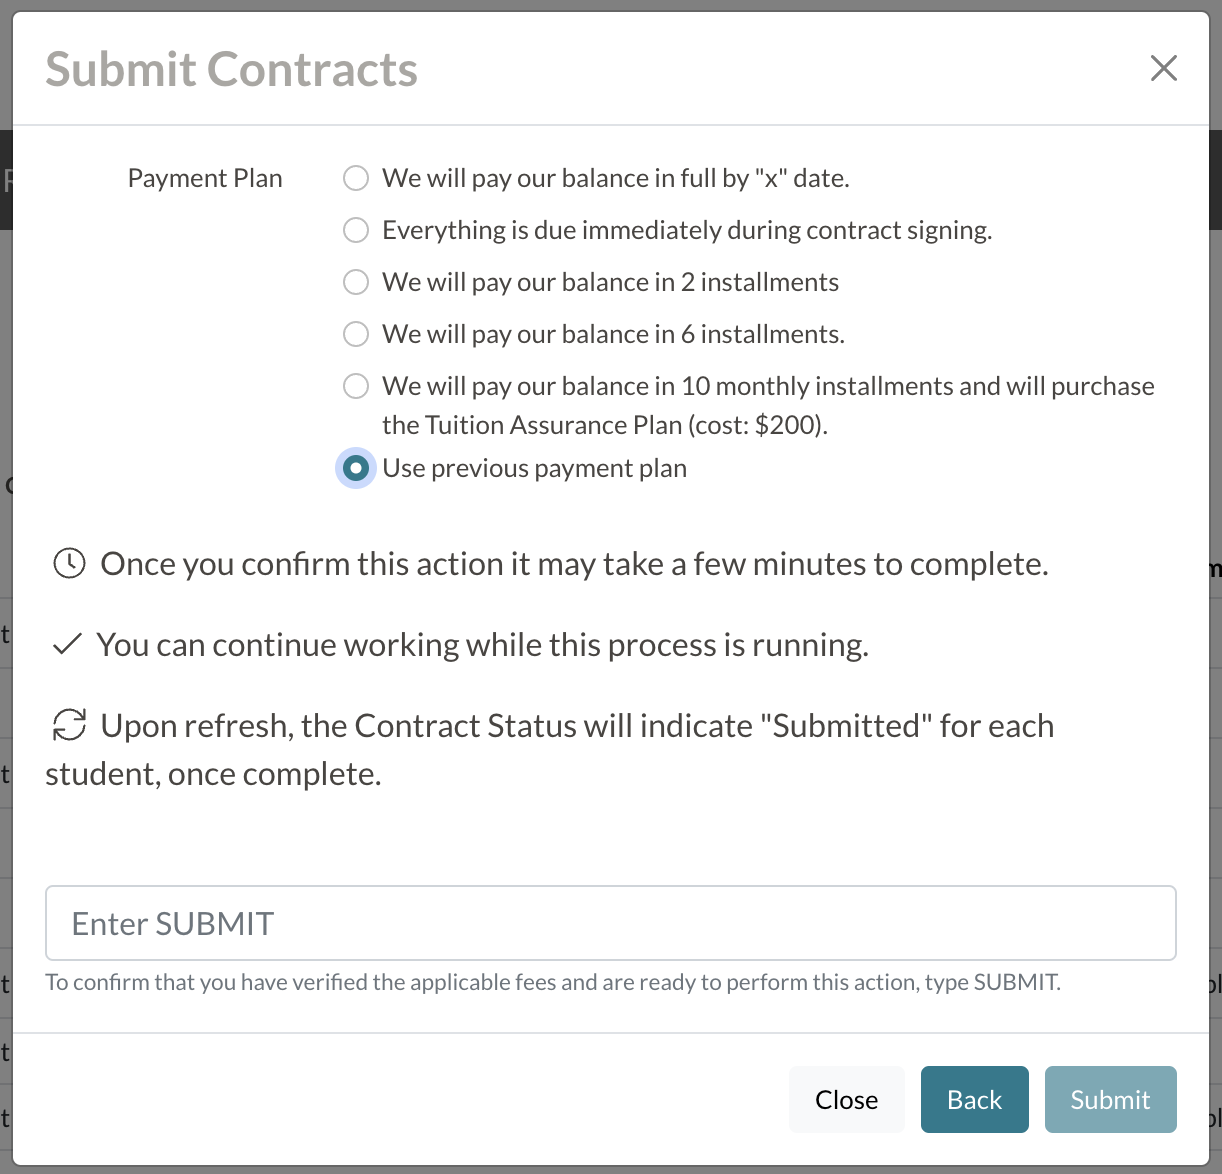 image of the submit dialogue box